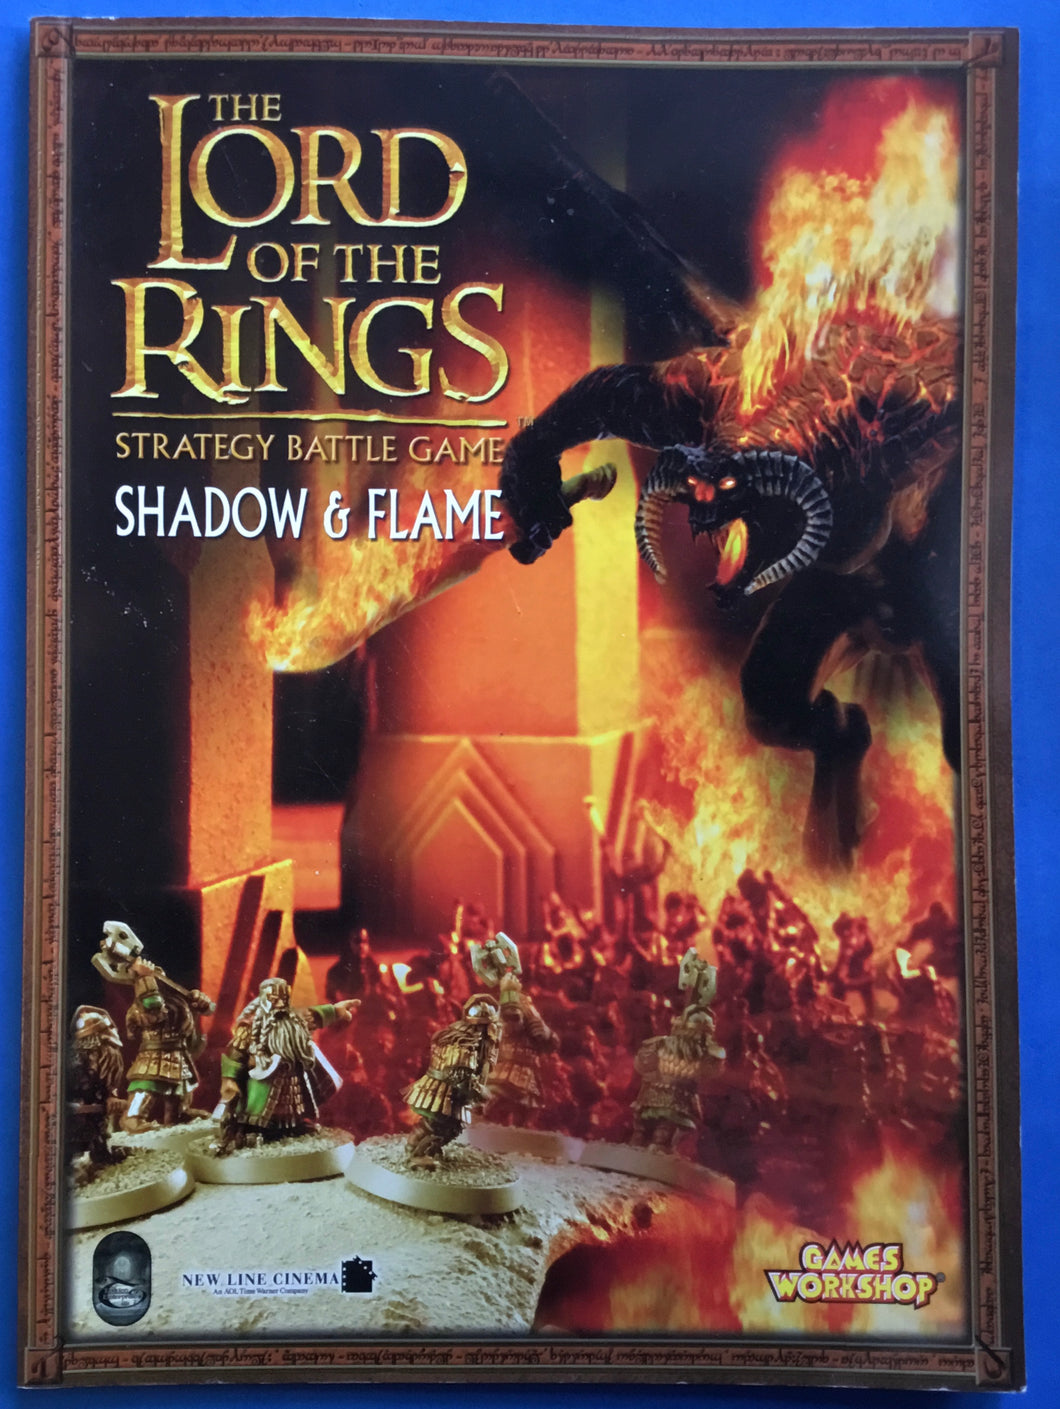 The Lord of the Rings Strategy Battle Game Shadow & Flame Games Workshop